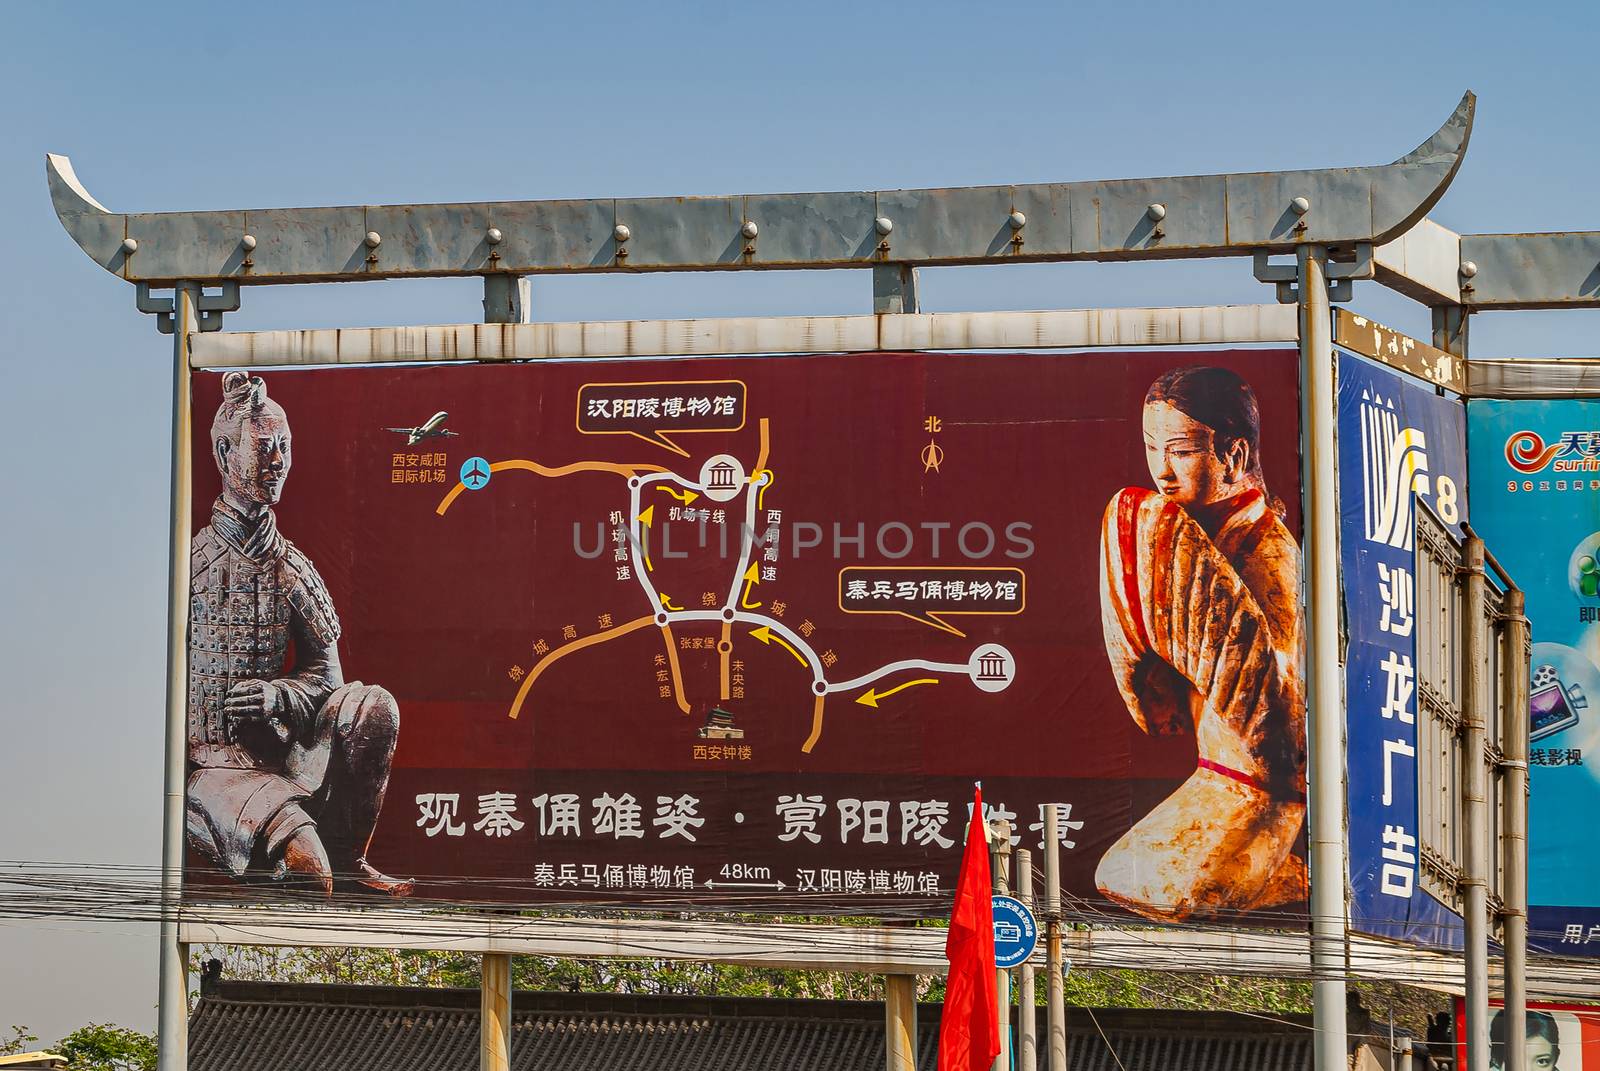 Xian, China - May 1, 2010: Terracotta Army museum. Colorful giant billboard along highway with directions to the museum and excavation site under ligh blue sky.